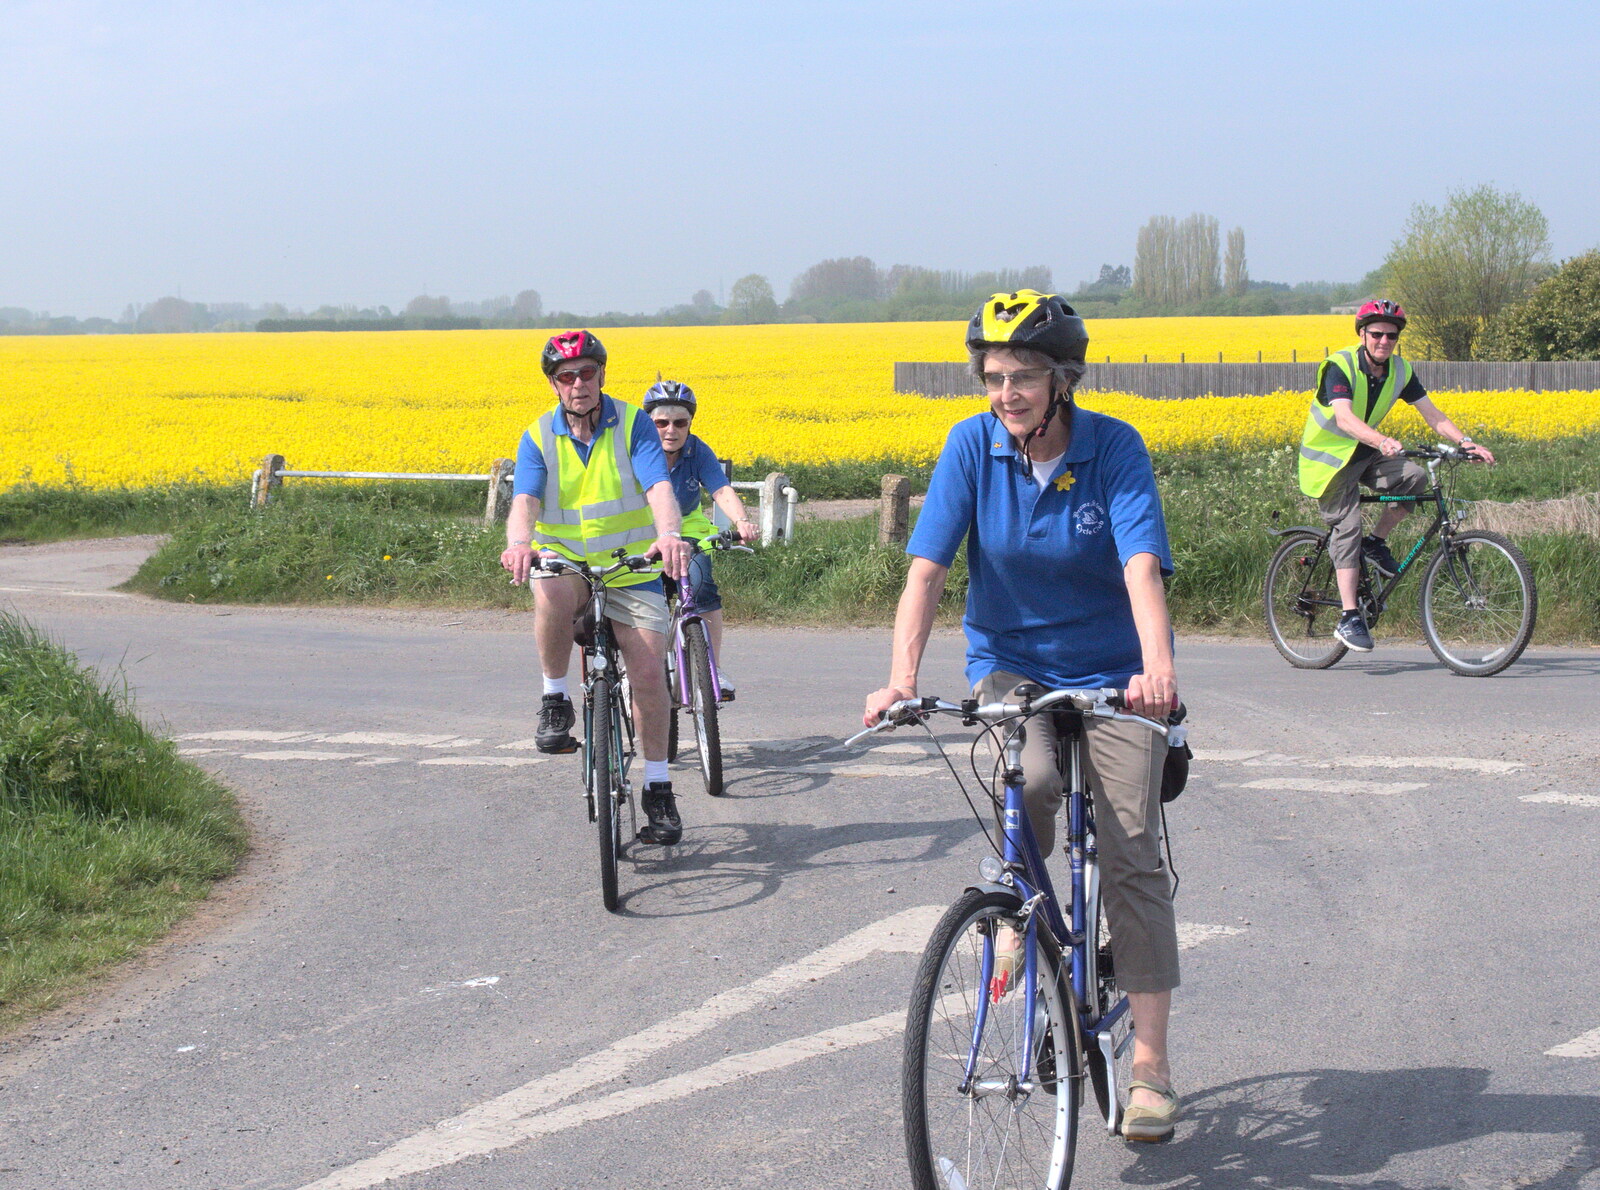 Colin, Spam, Jill and John Willy cycle past from The BSCC Cycling Weekender, Outwell, West Norfolk - 7th May 2016